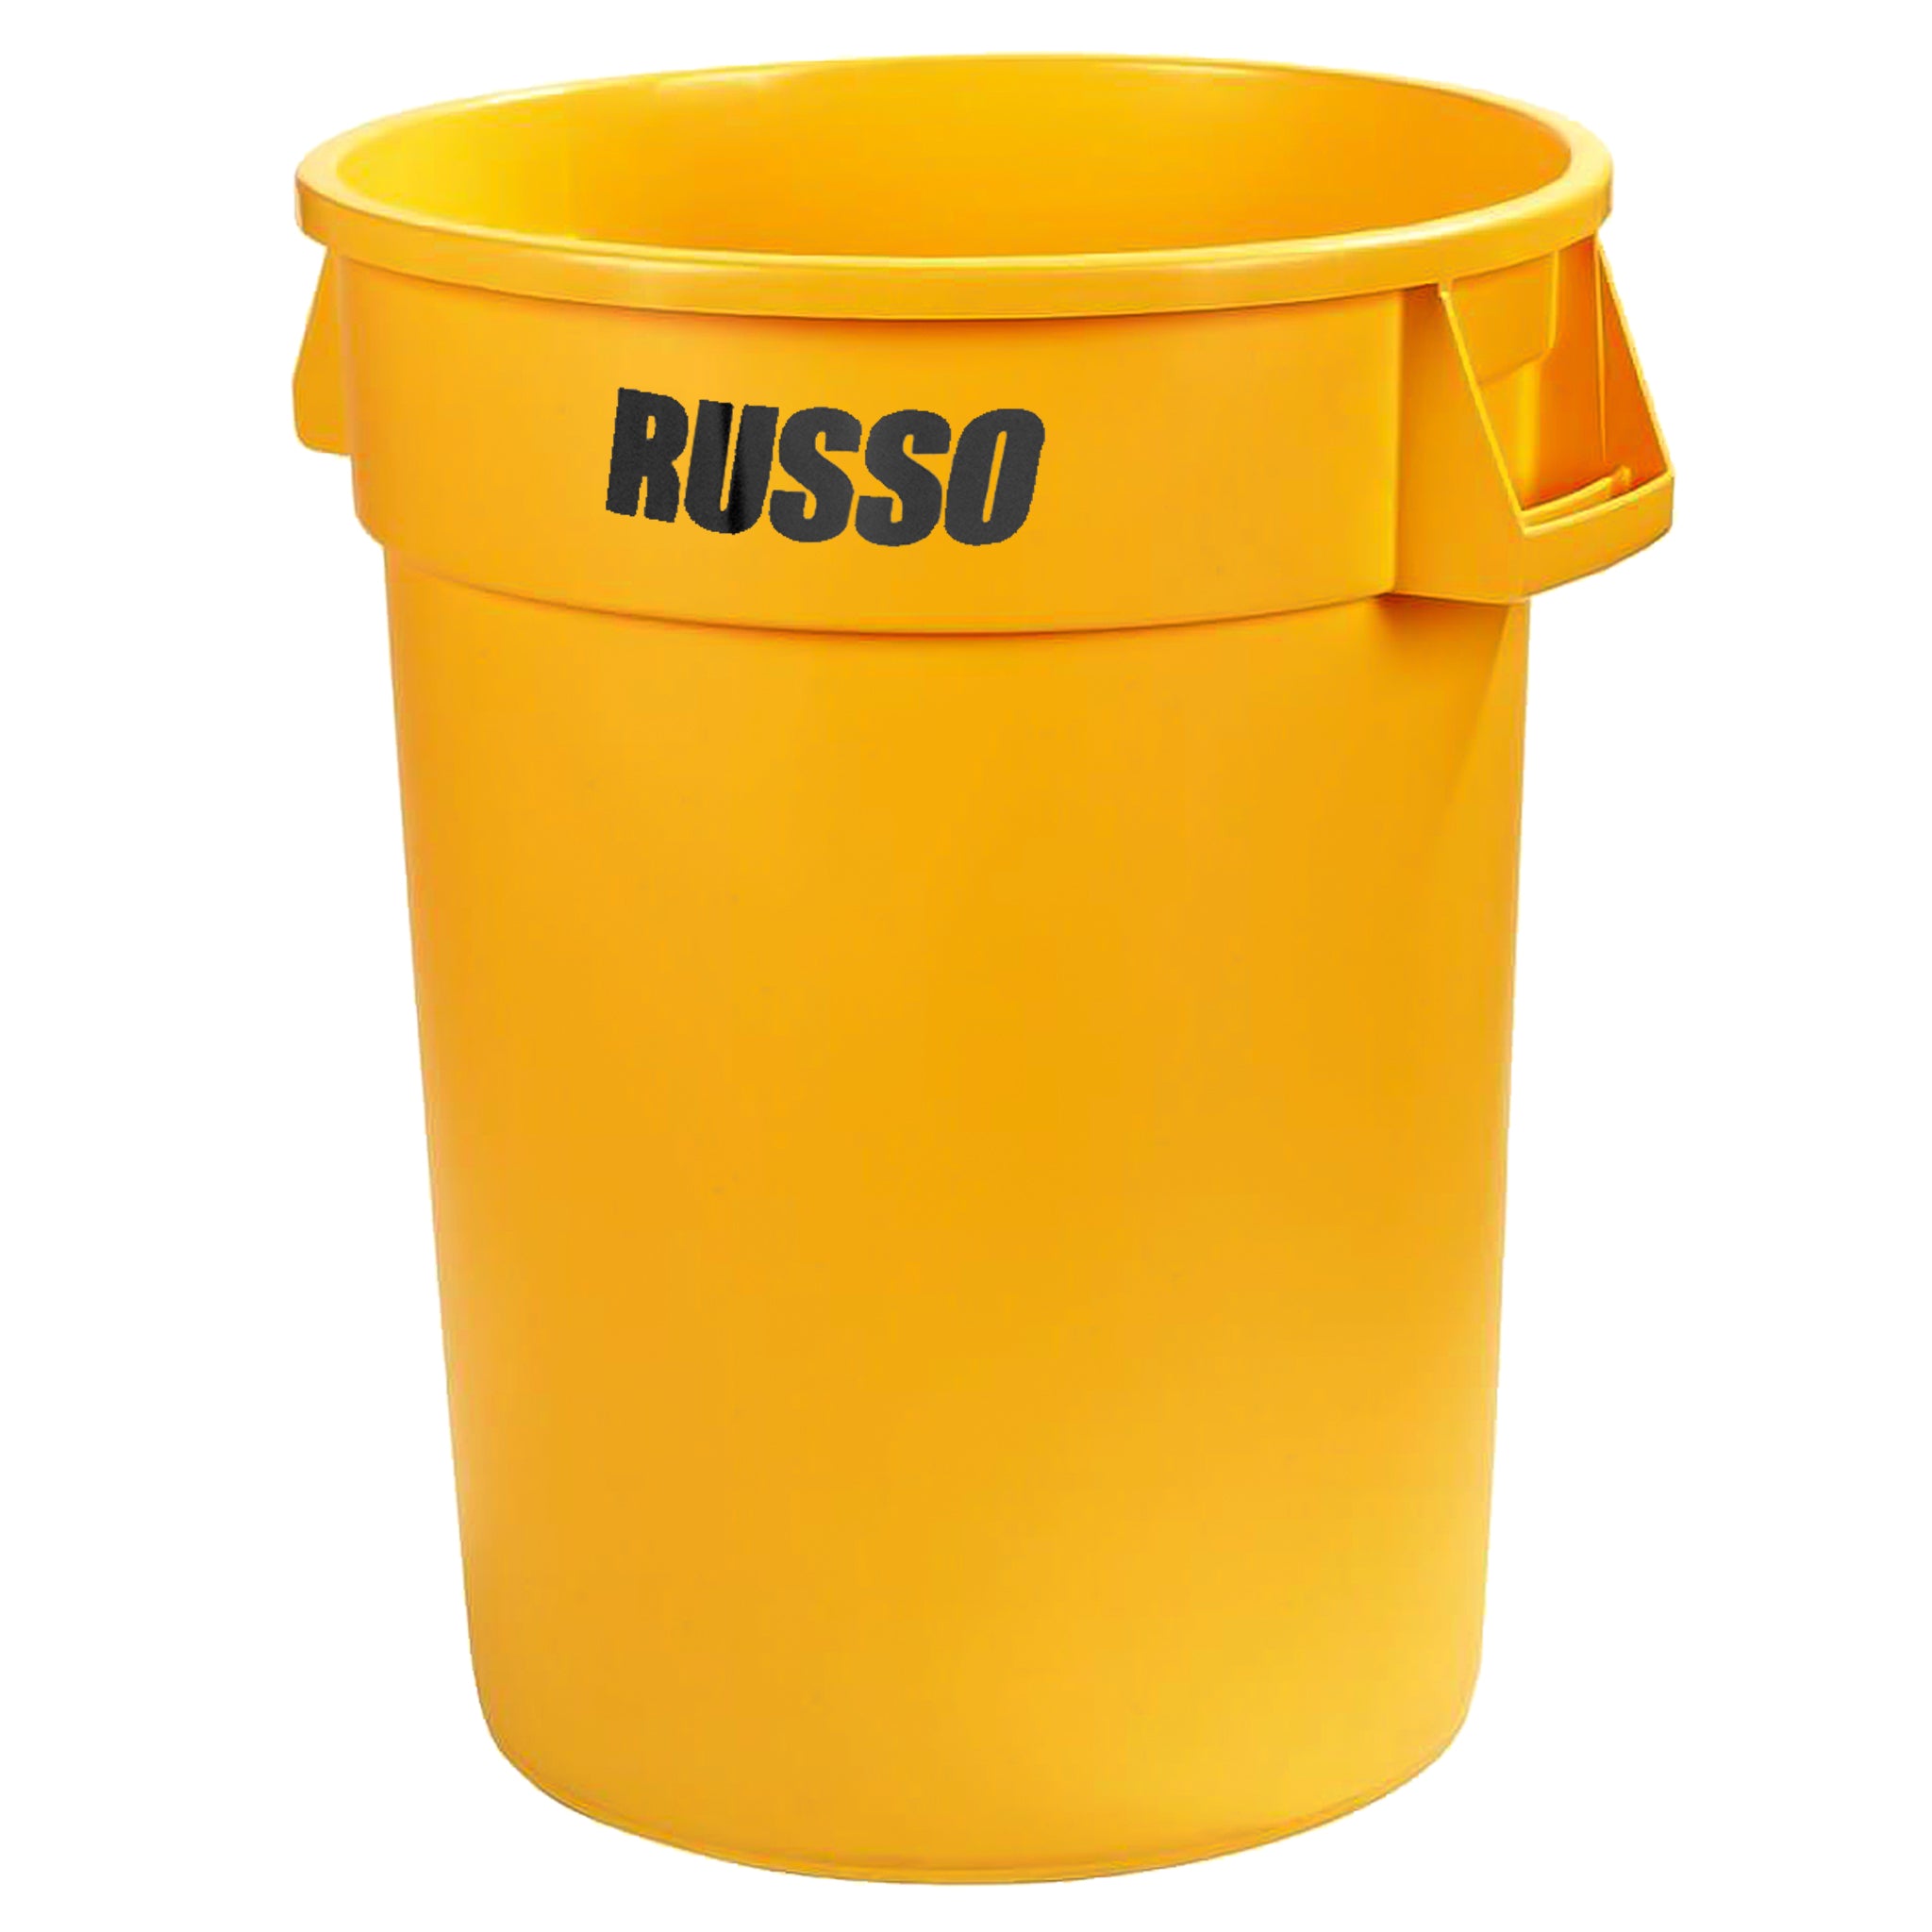 RUSSO Glow Garbage Can 44 Gallon - Yellow